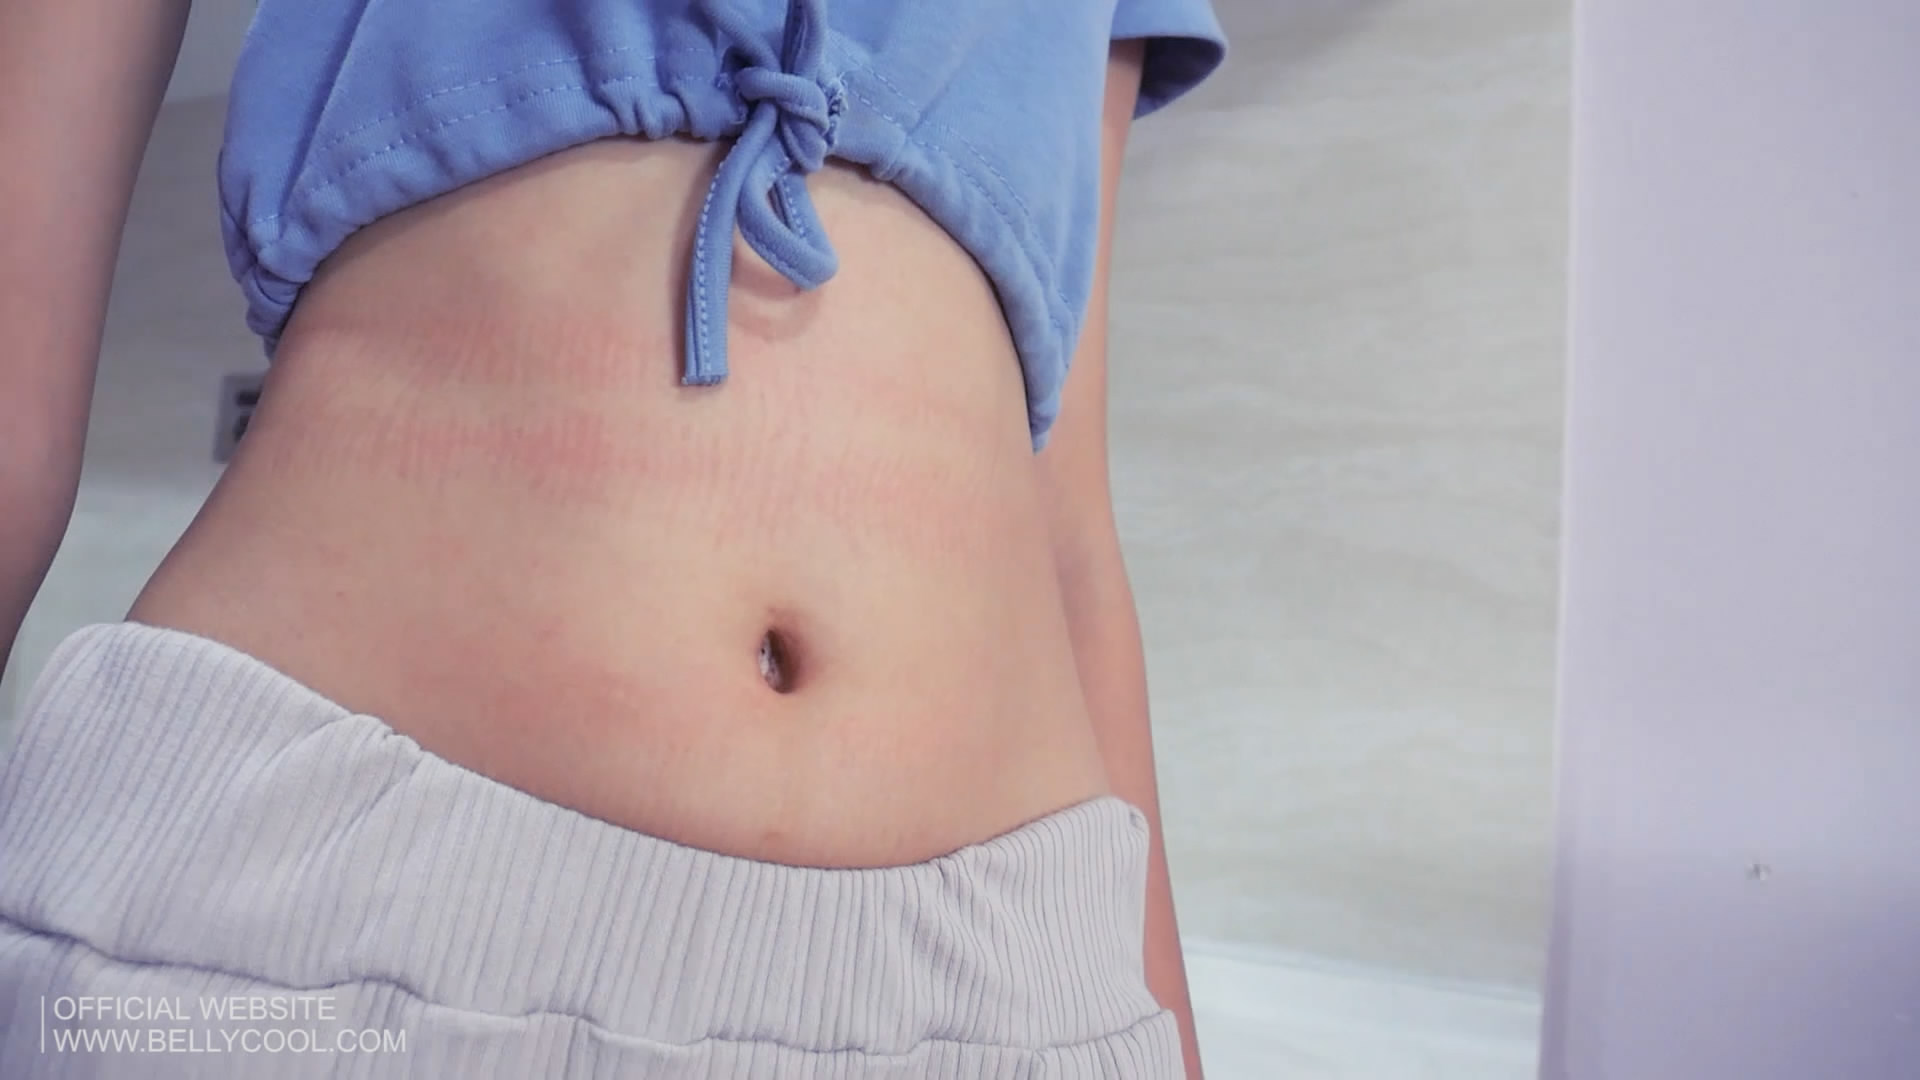 The deepest belly button